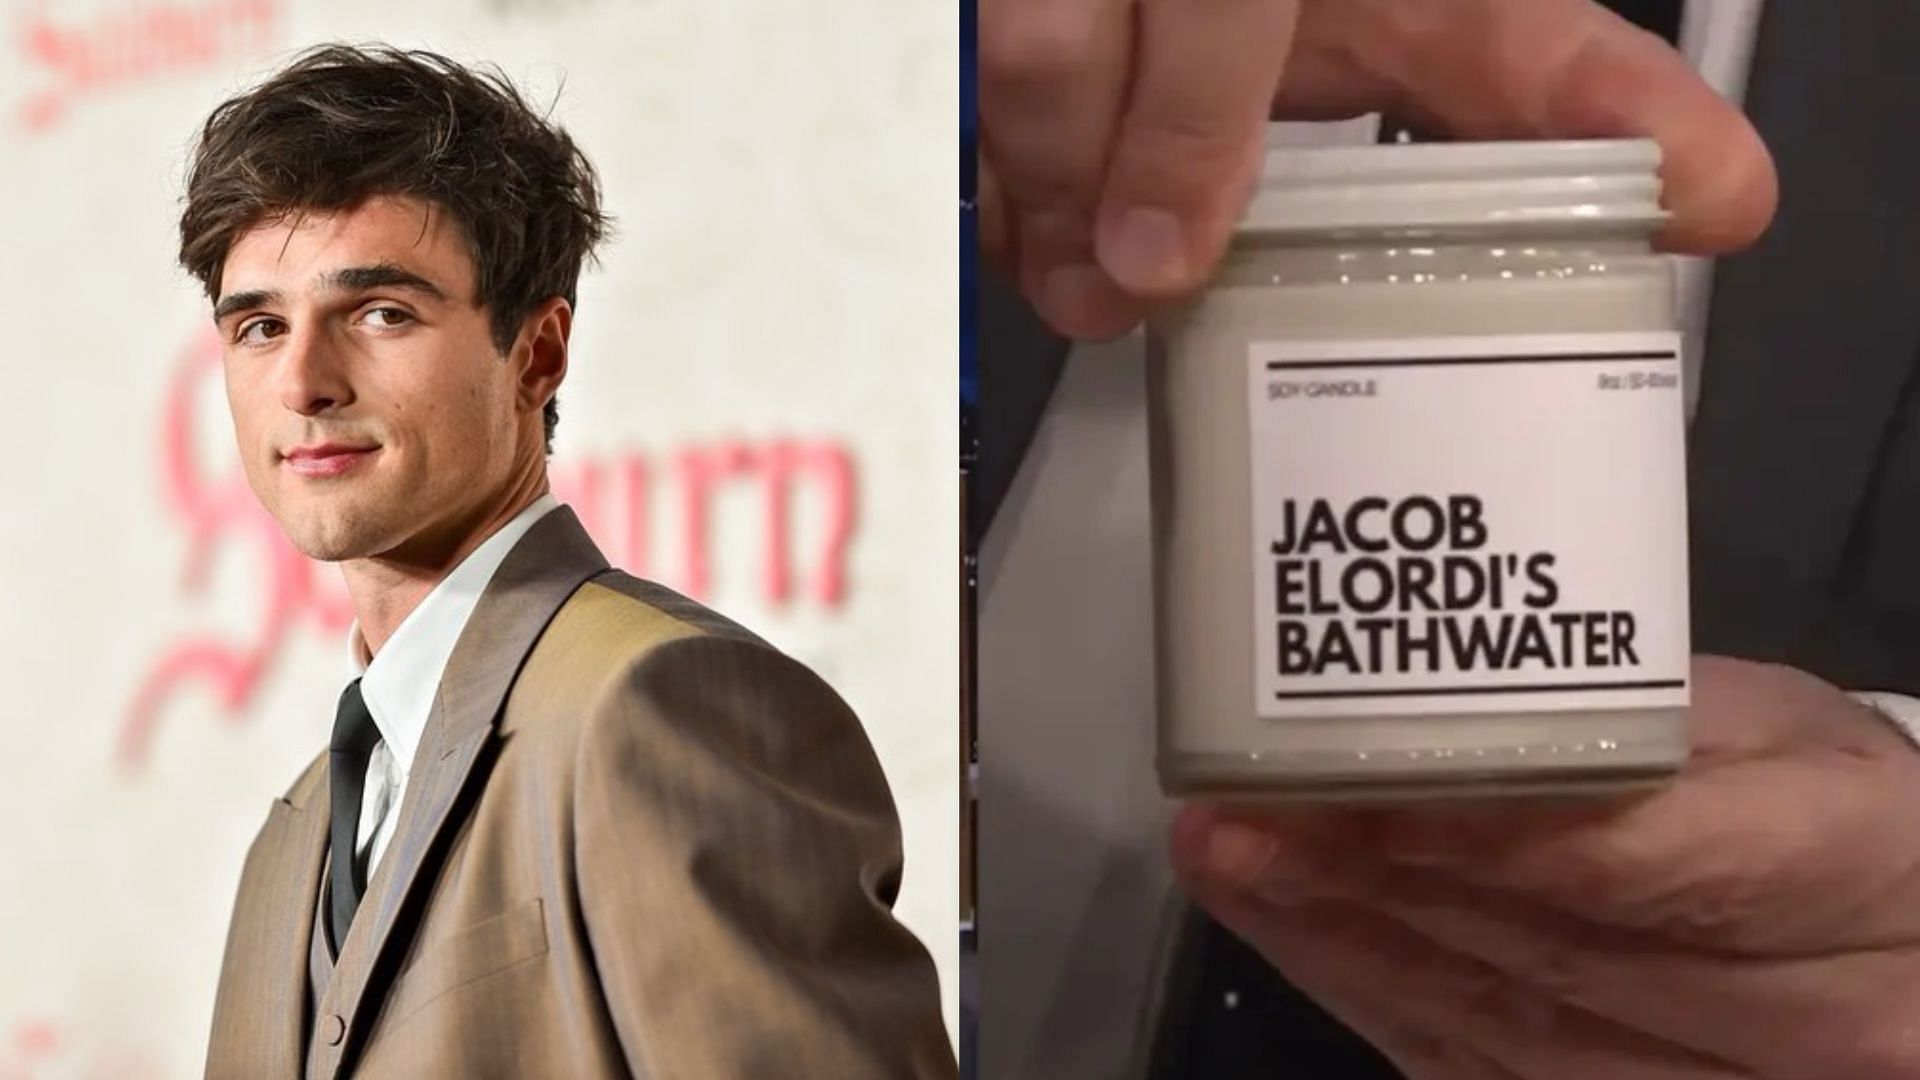 Netizens react as Jacob Elordi smells the candle made in his honour (Image via Instagram / @jacobelordi / YouTube / The Tonight Show Starring Jimmy Fallon)